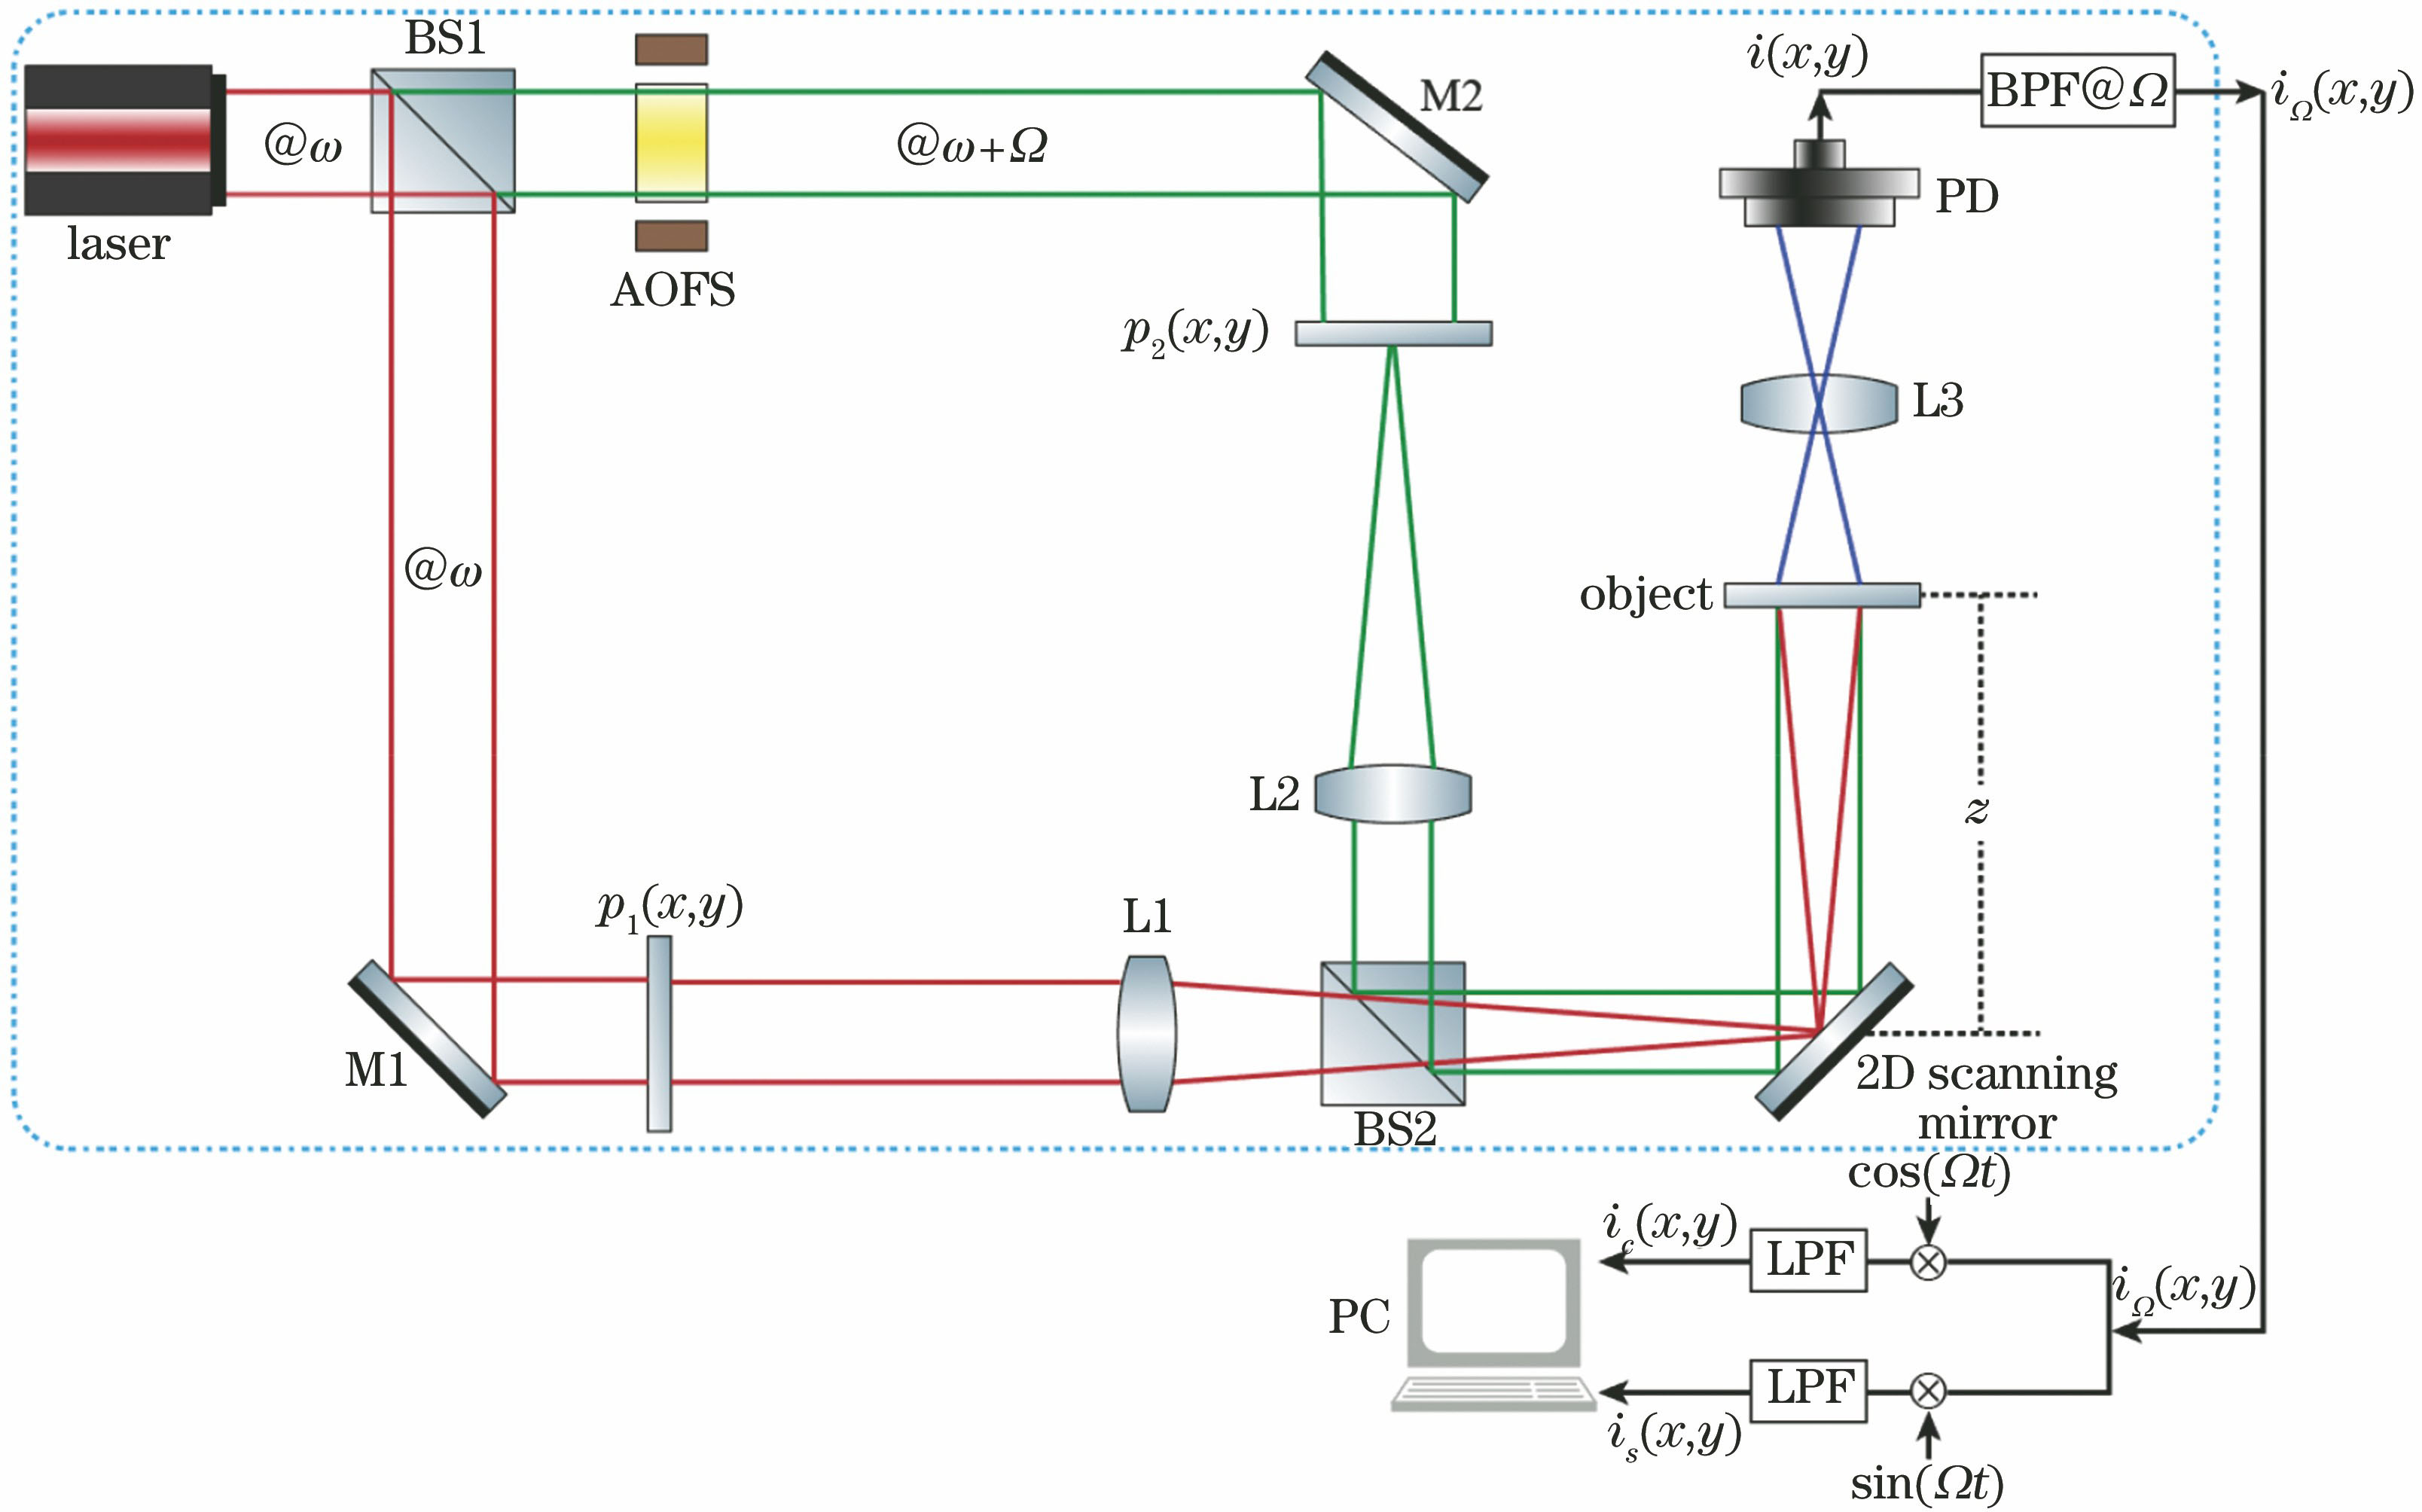 Experimental system of optical scanning holography, where dashed box shows a typical two-pupil optical heterodyne scanning imaging system